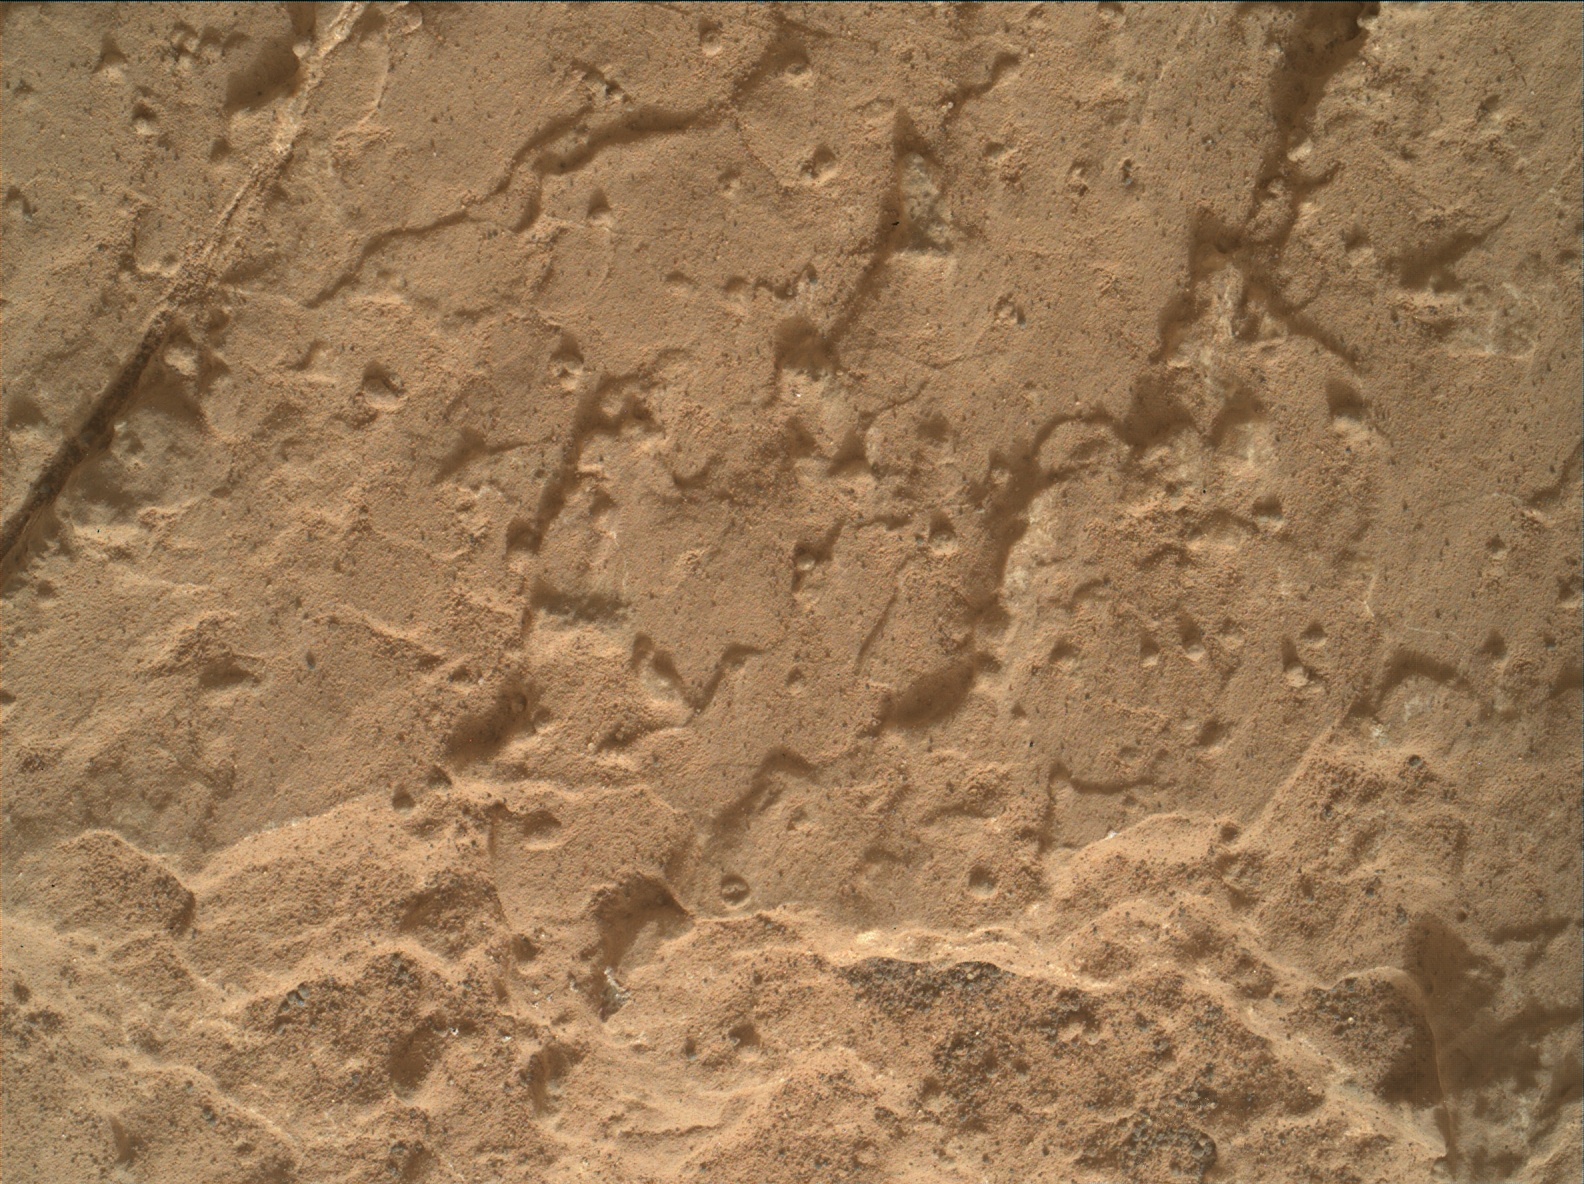 Nasa's Mars rover Curiosity acquired this image using its Mars Hand Lens Imager (MAHLI) on Sol 2804